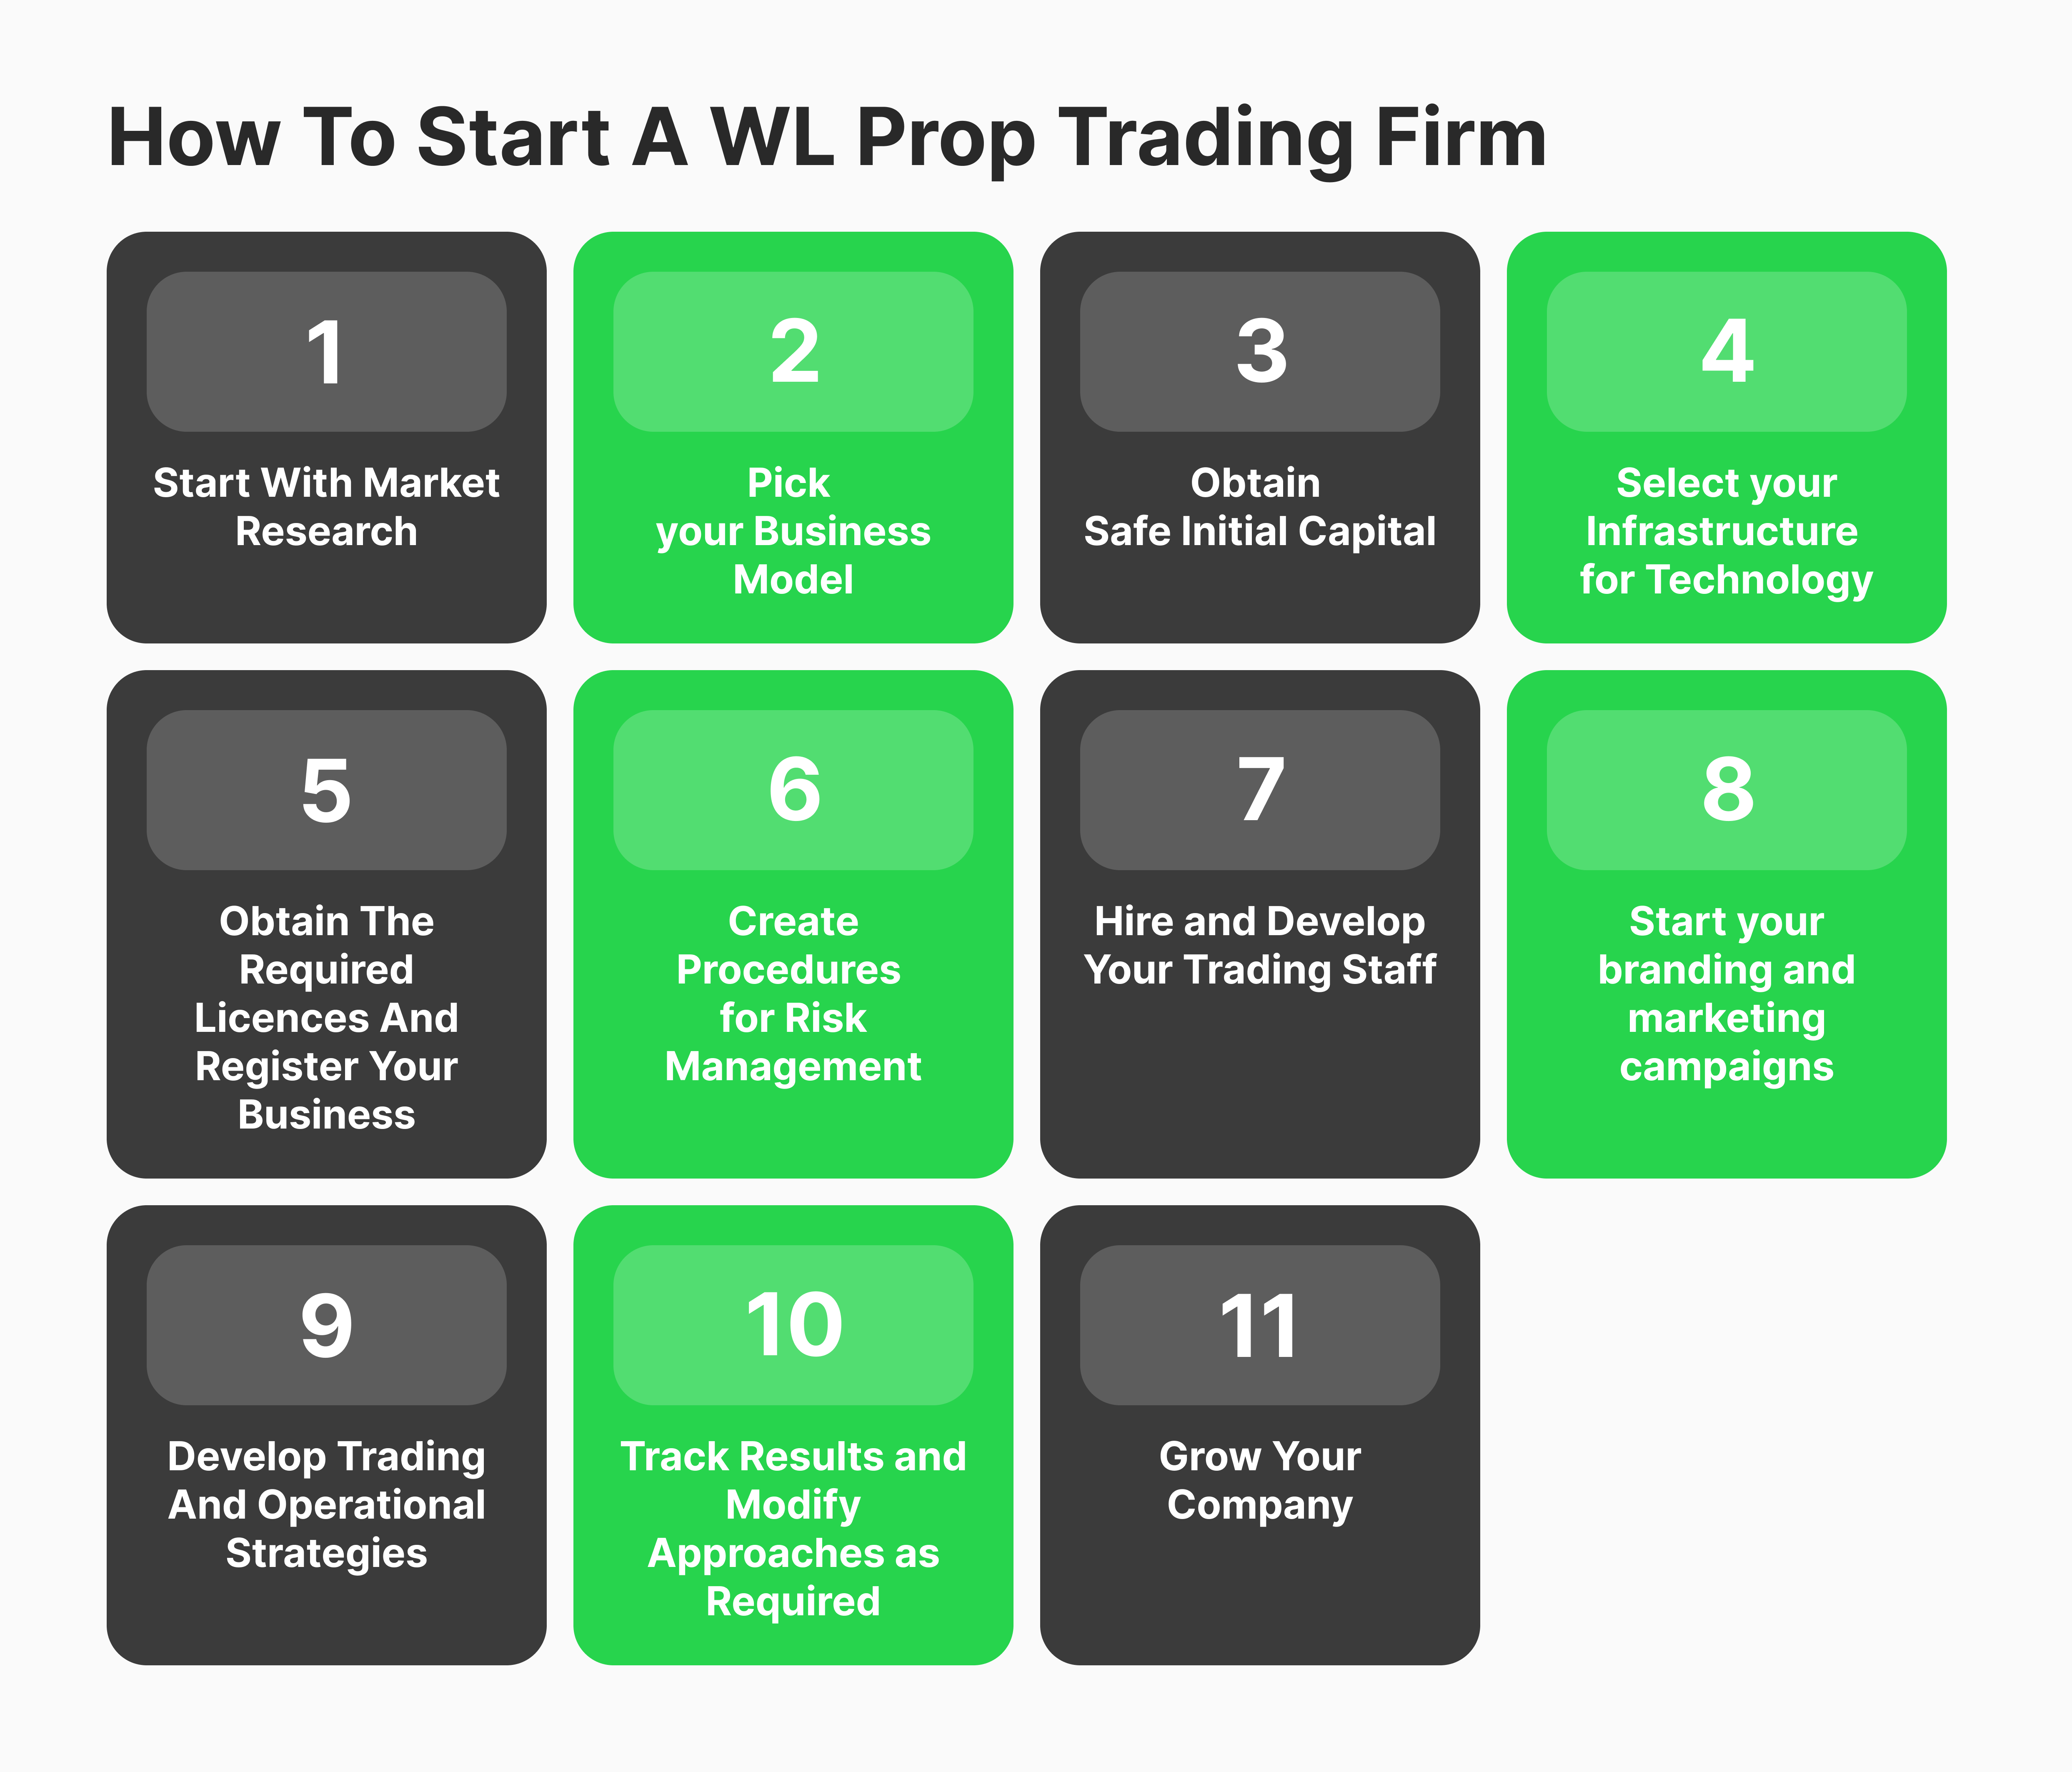 Guide to starting a prop firm